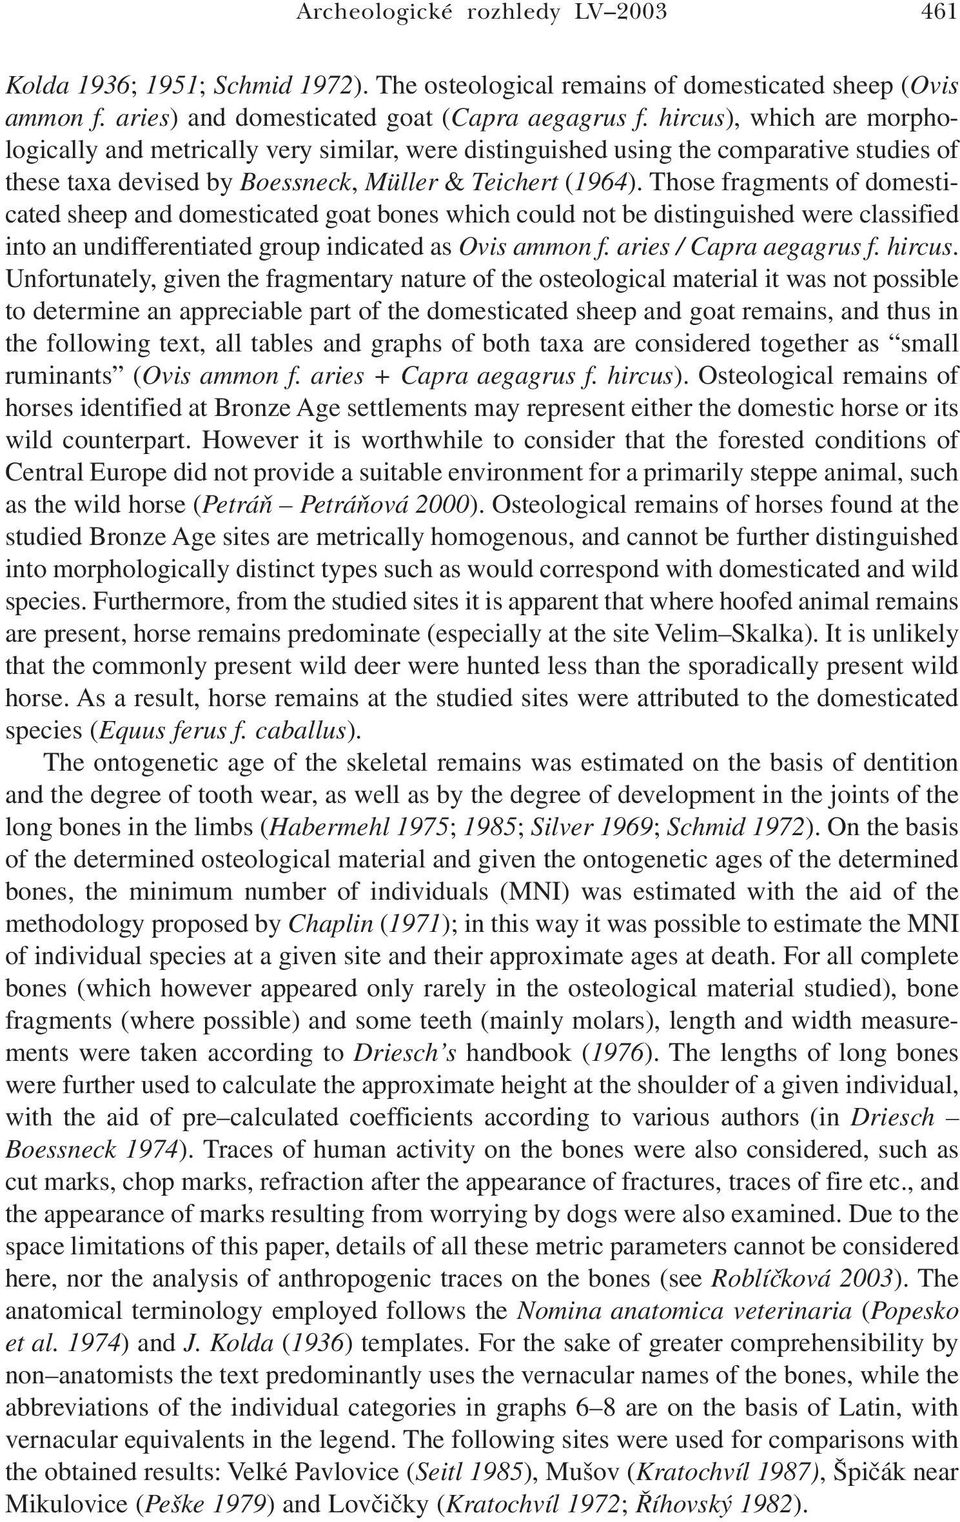 Those fragments of domesticated sheep and domesticated goat bones which could not be distinguished were classified into an undifferentiated group indicated as Ovis ammon f. aries / Capra aegagrus f.